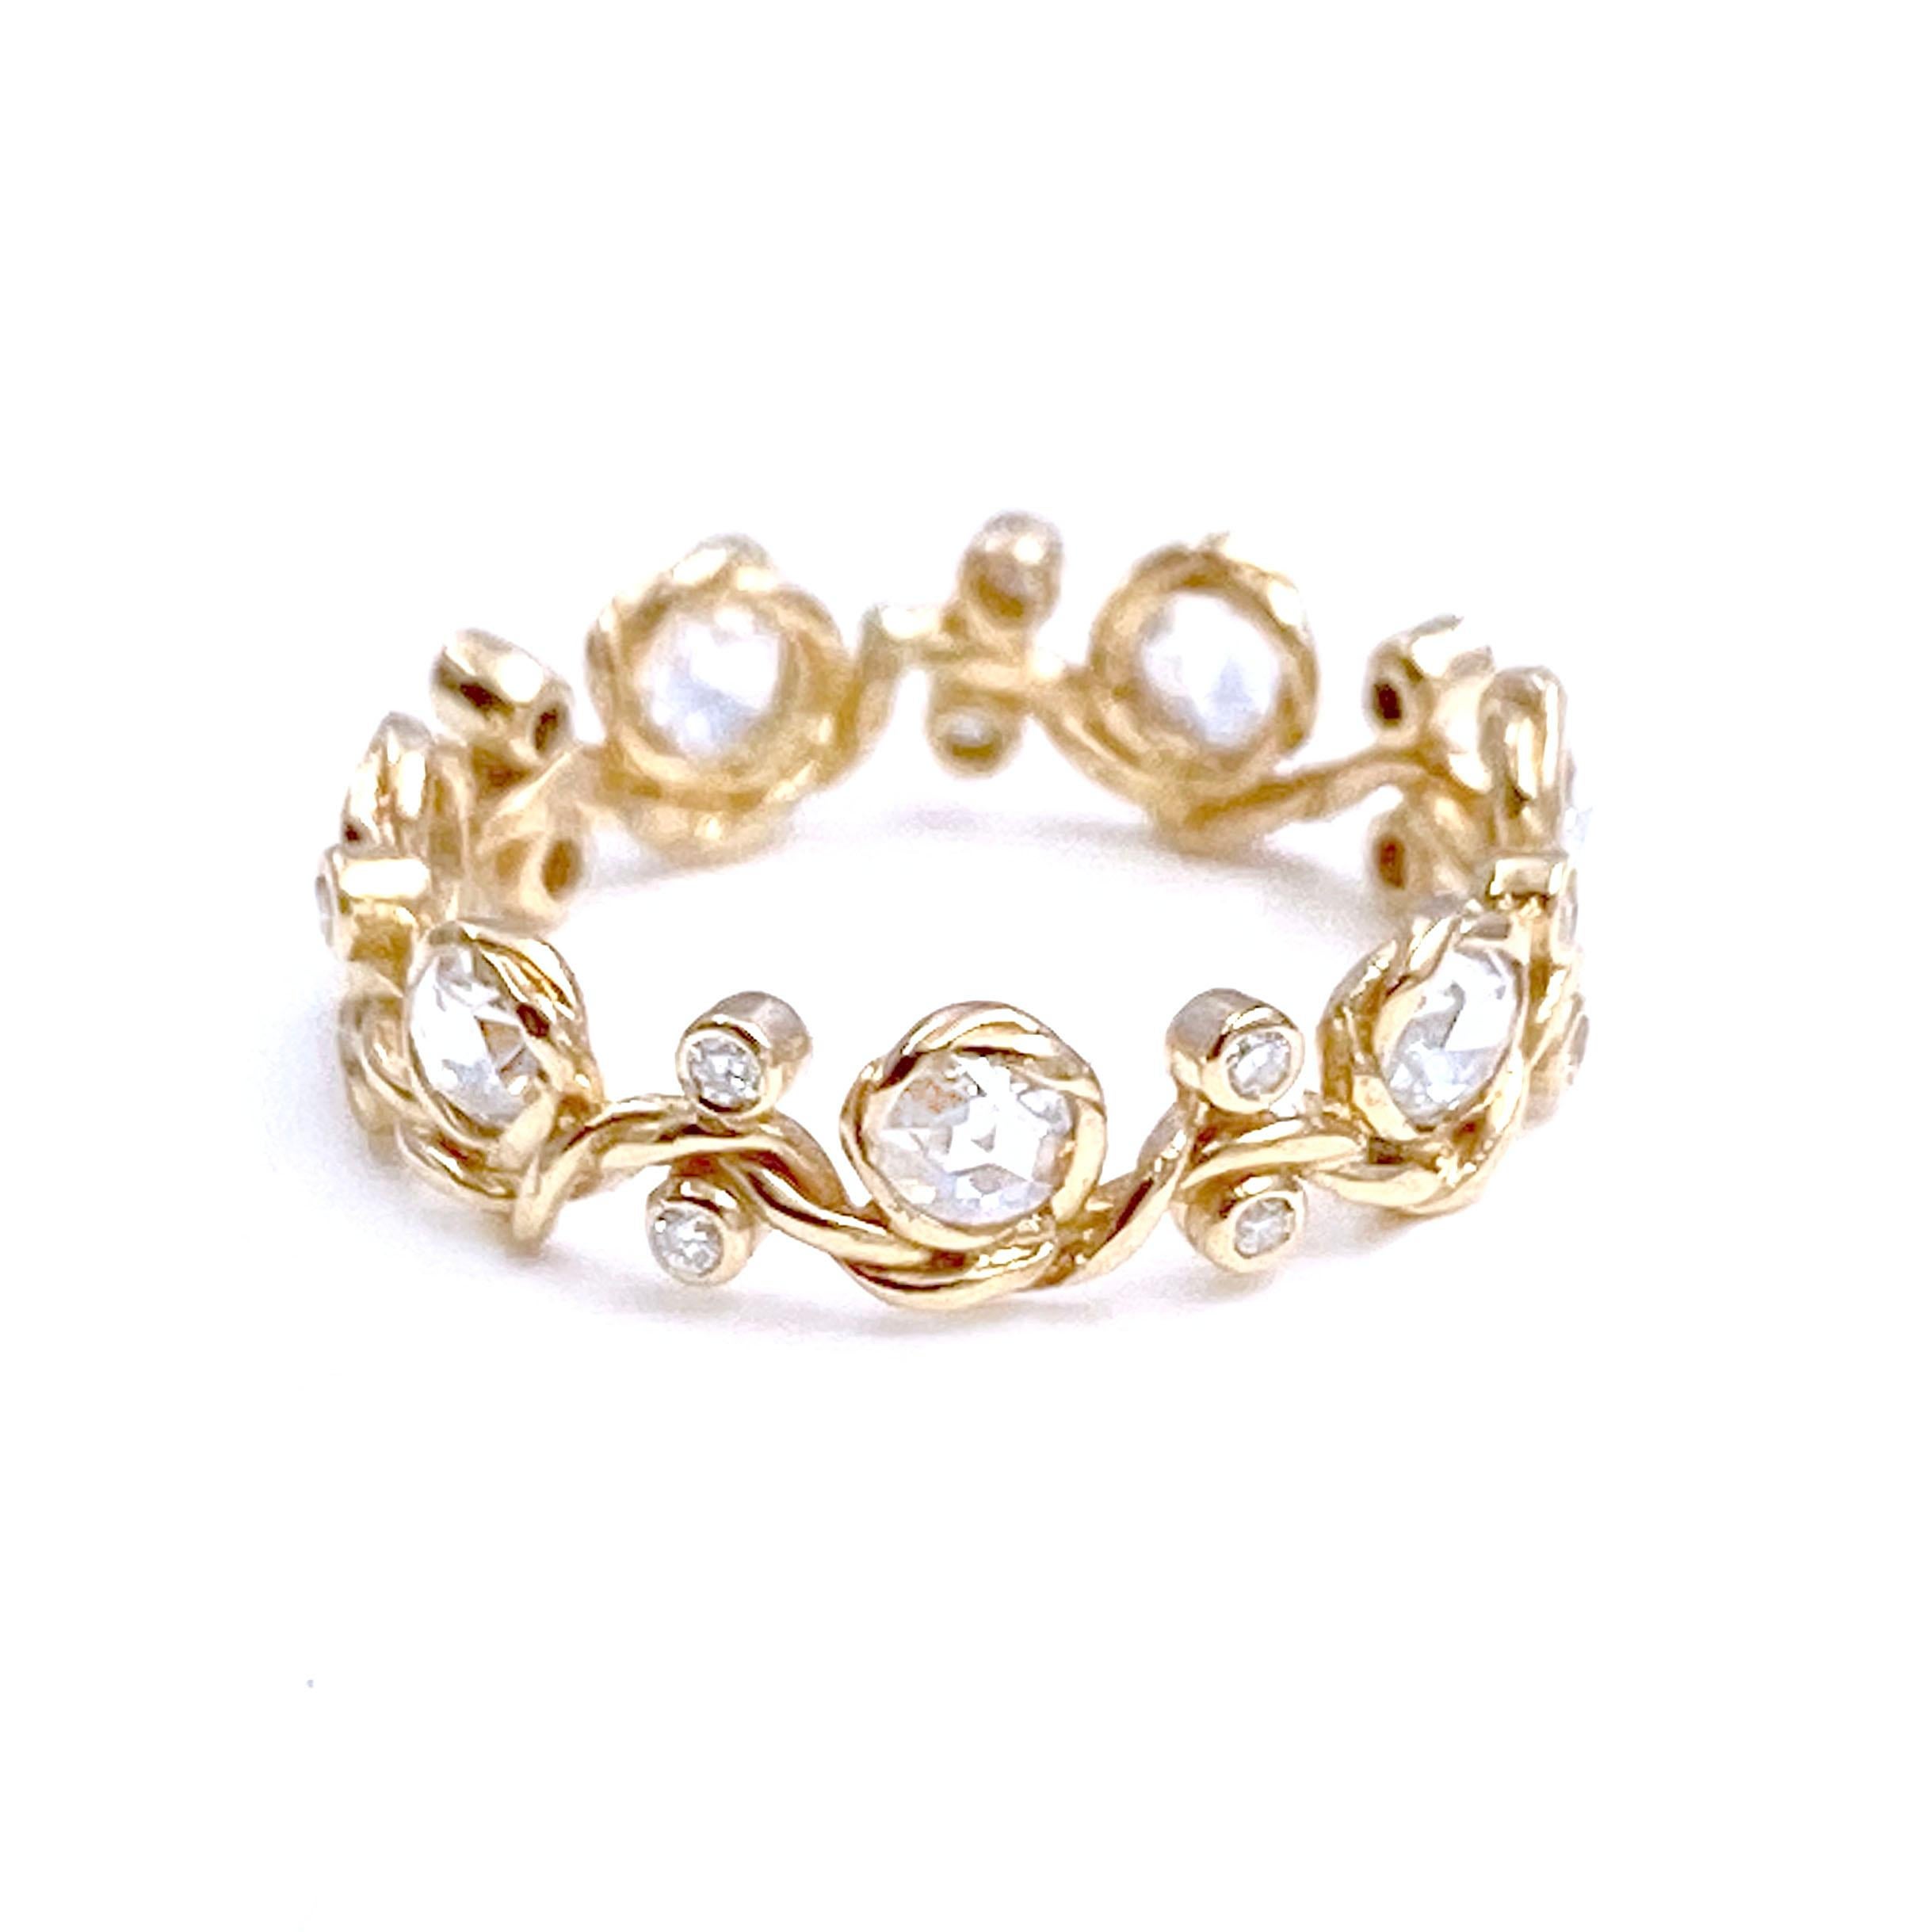 From JeweLyrie's Alternative Bridal collection, Vineyard rose-cut diamond eternity stackable gold crown ring features signature twist bezel set rose-cut and brilliant cut diamonds perching along the signature wavy twist ring. The dazzling elegant